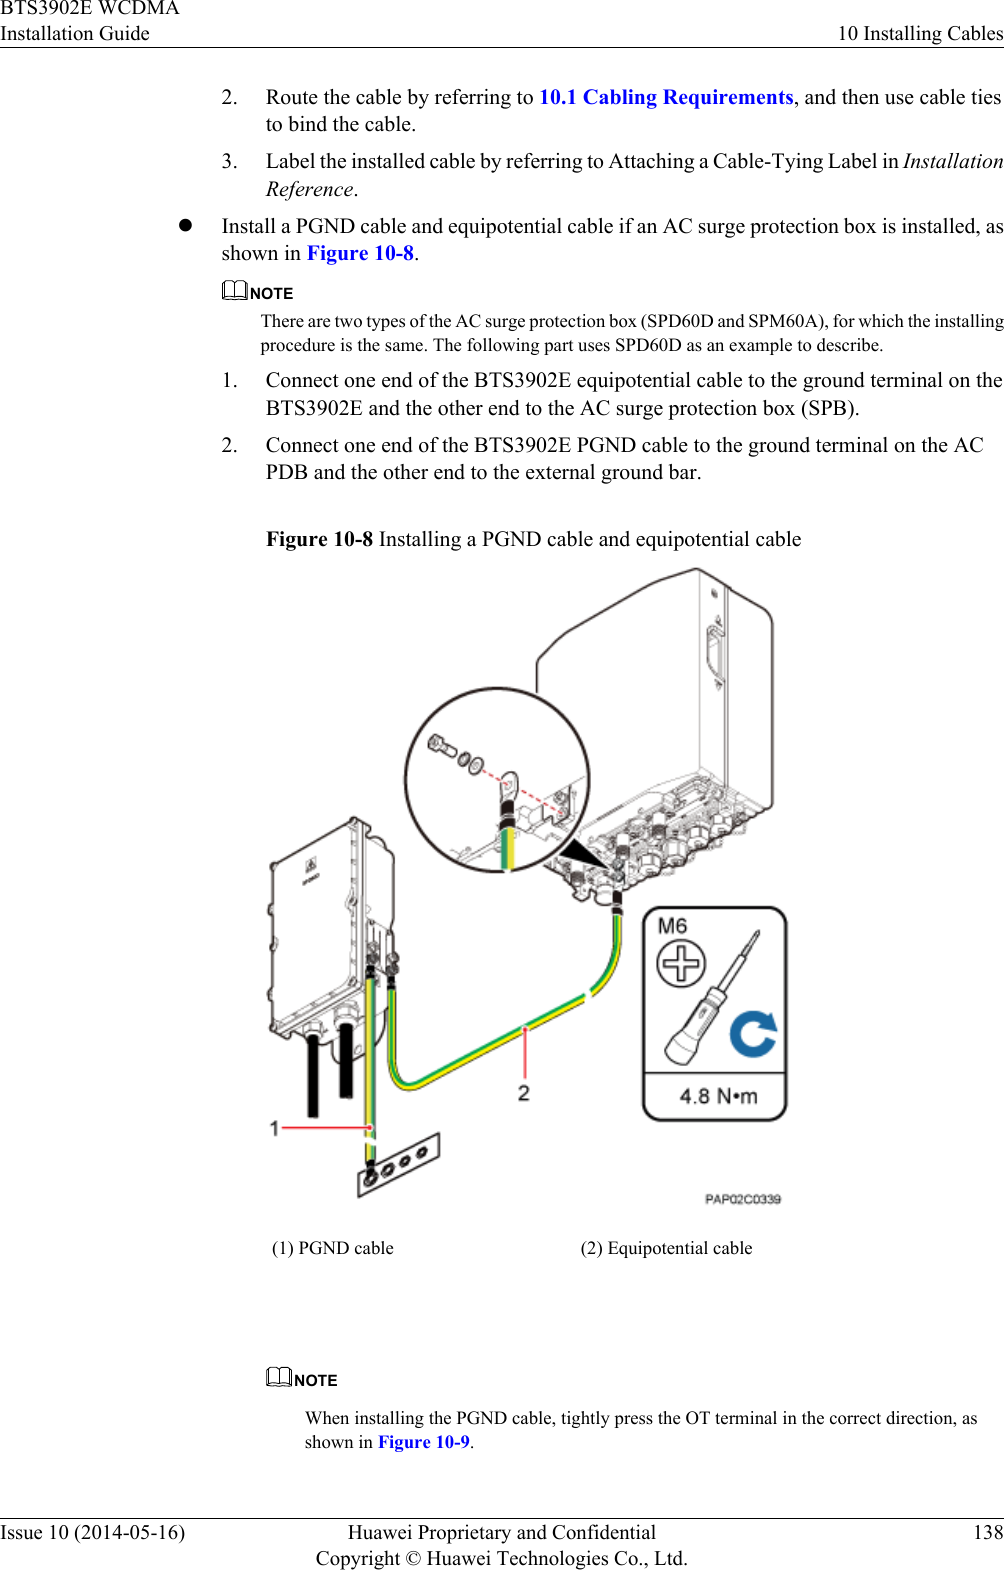 2. Route the cable by referring to 10.1 Cabling Requirements, and then use cable tiesto bind the cable.3. Label the installed cable by referring to Attaching a Cable-Tying Label in InstallationReference.lInstall a PGND cable and equipotential cable if an AC surge protection box is installed, asshown in Figure 10-8.NOTEThere are two types of the AC surge protection box (SPD60D and SPM60A), for which the installingprocedure is the same. The following part uses SPD60D as an example to describe.1. Connect one end of the BTS3902E equipotential cable to the ground terminal on theBTS3902E and the other end to the AC surge protection box (SPB).2. Connect one end of the BTS3902E PGND cable to the ground terminal on the ACPDB and the other end to the external ground bar.Figure 10-8 Installing a PGND cable and equipotential cable(1) PGND cable (2) Equipotential cable NOTEWhen installing the PGND cable, tightly press the OT terminal in the correct direction, asshown in Figure 10-9.BTS3902E WCDMAInstallation Guide 10 Installing CablesIssue 10 (2014-05-16) Huawei Proprietary and ConfidentialCopyright © Huawei Technologies Co., Ltd.138